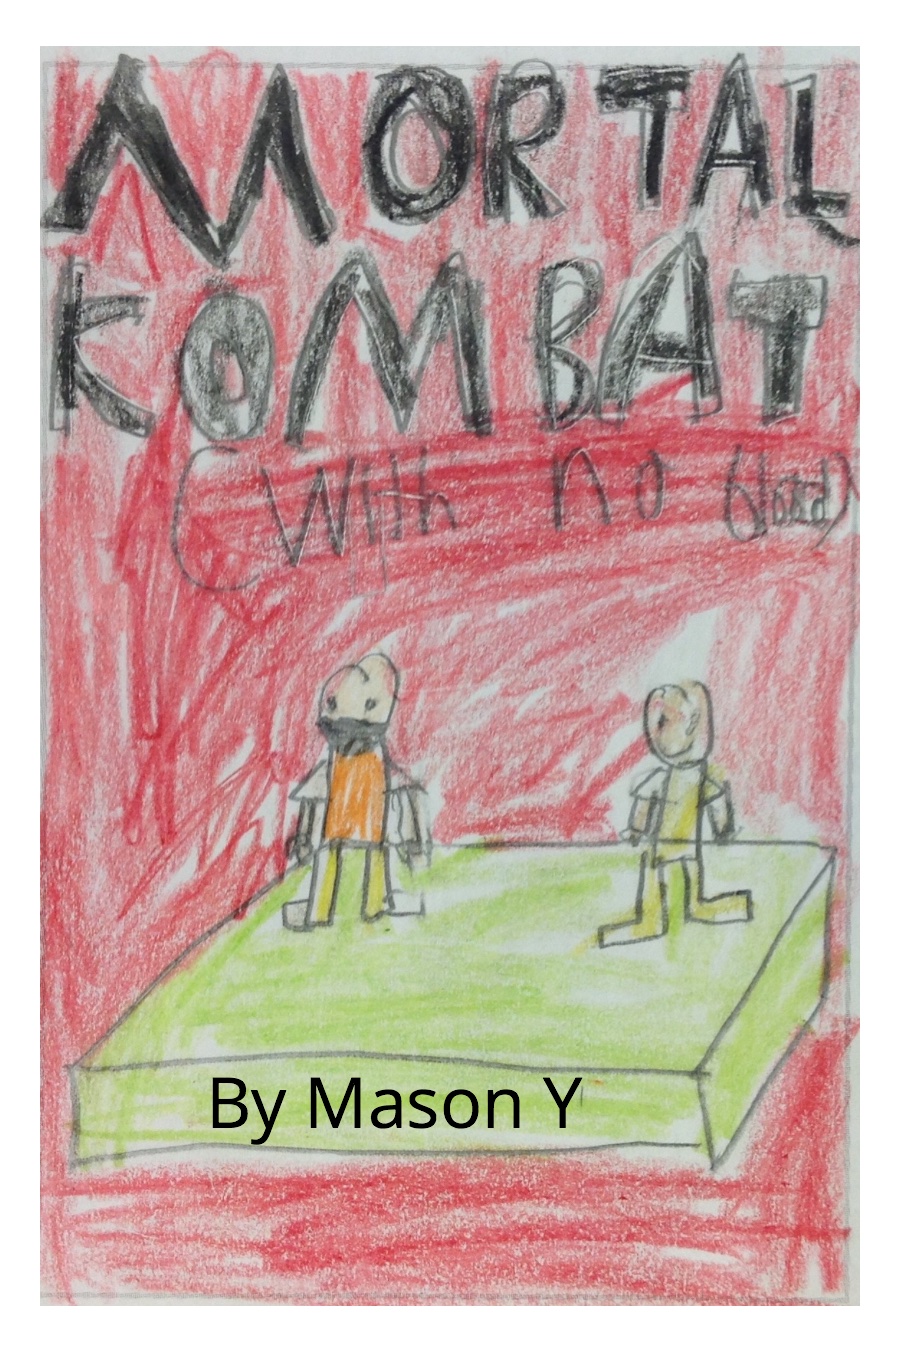 Moral Kombat(with no blood) by Mason Y